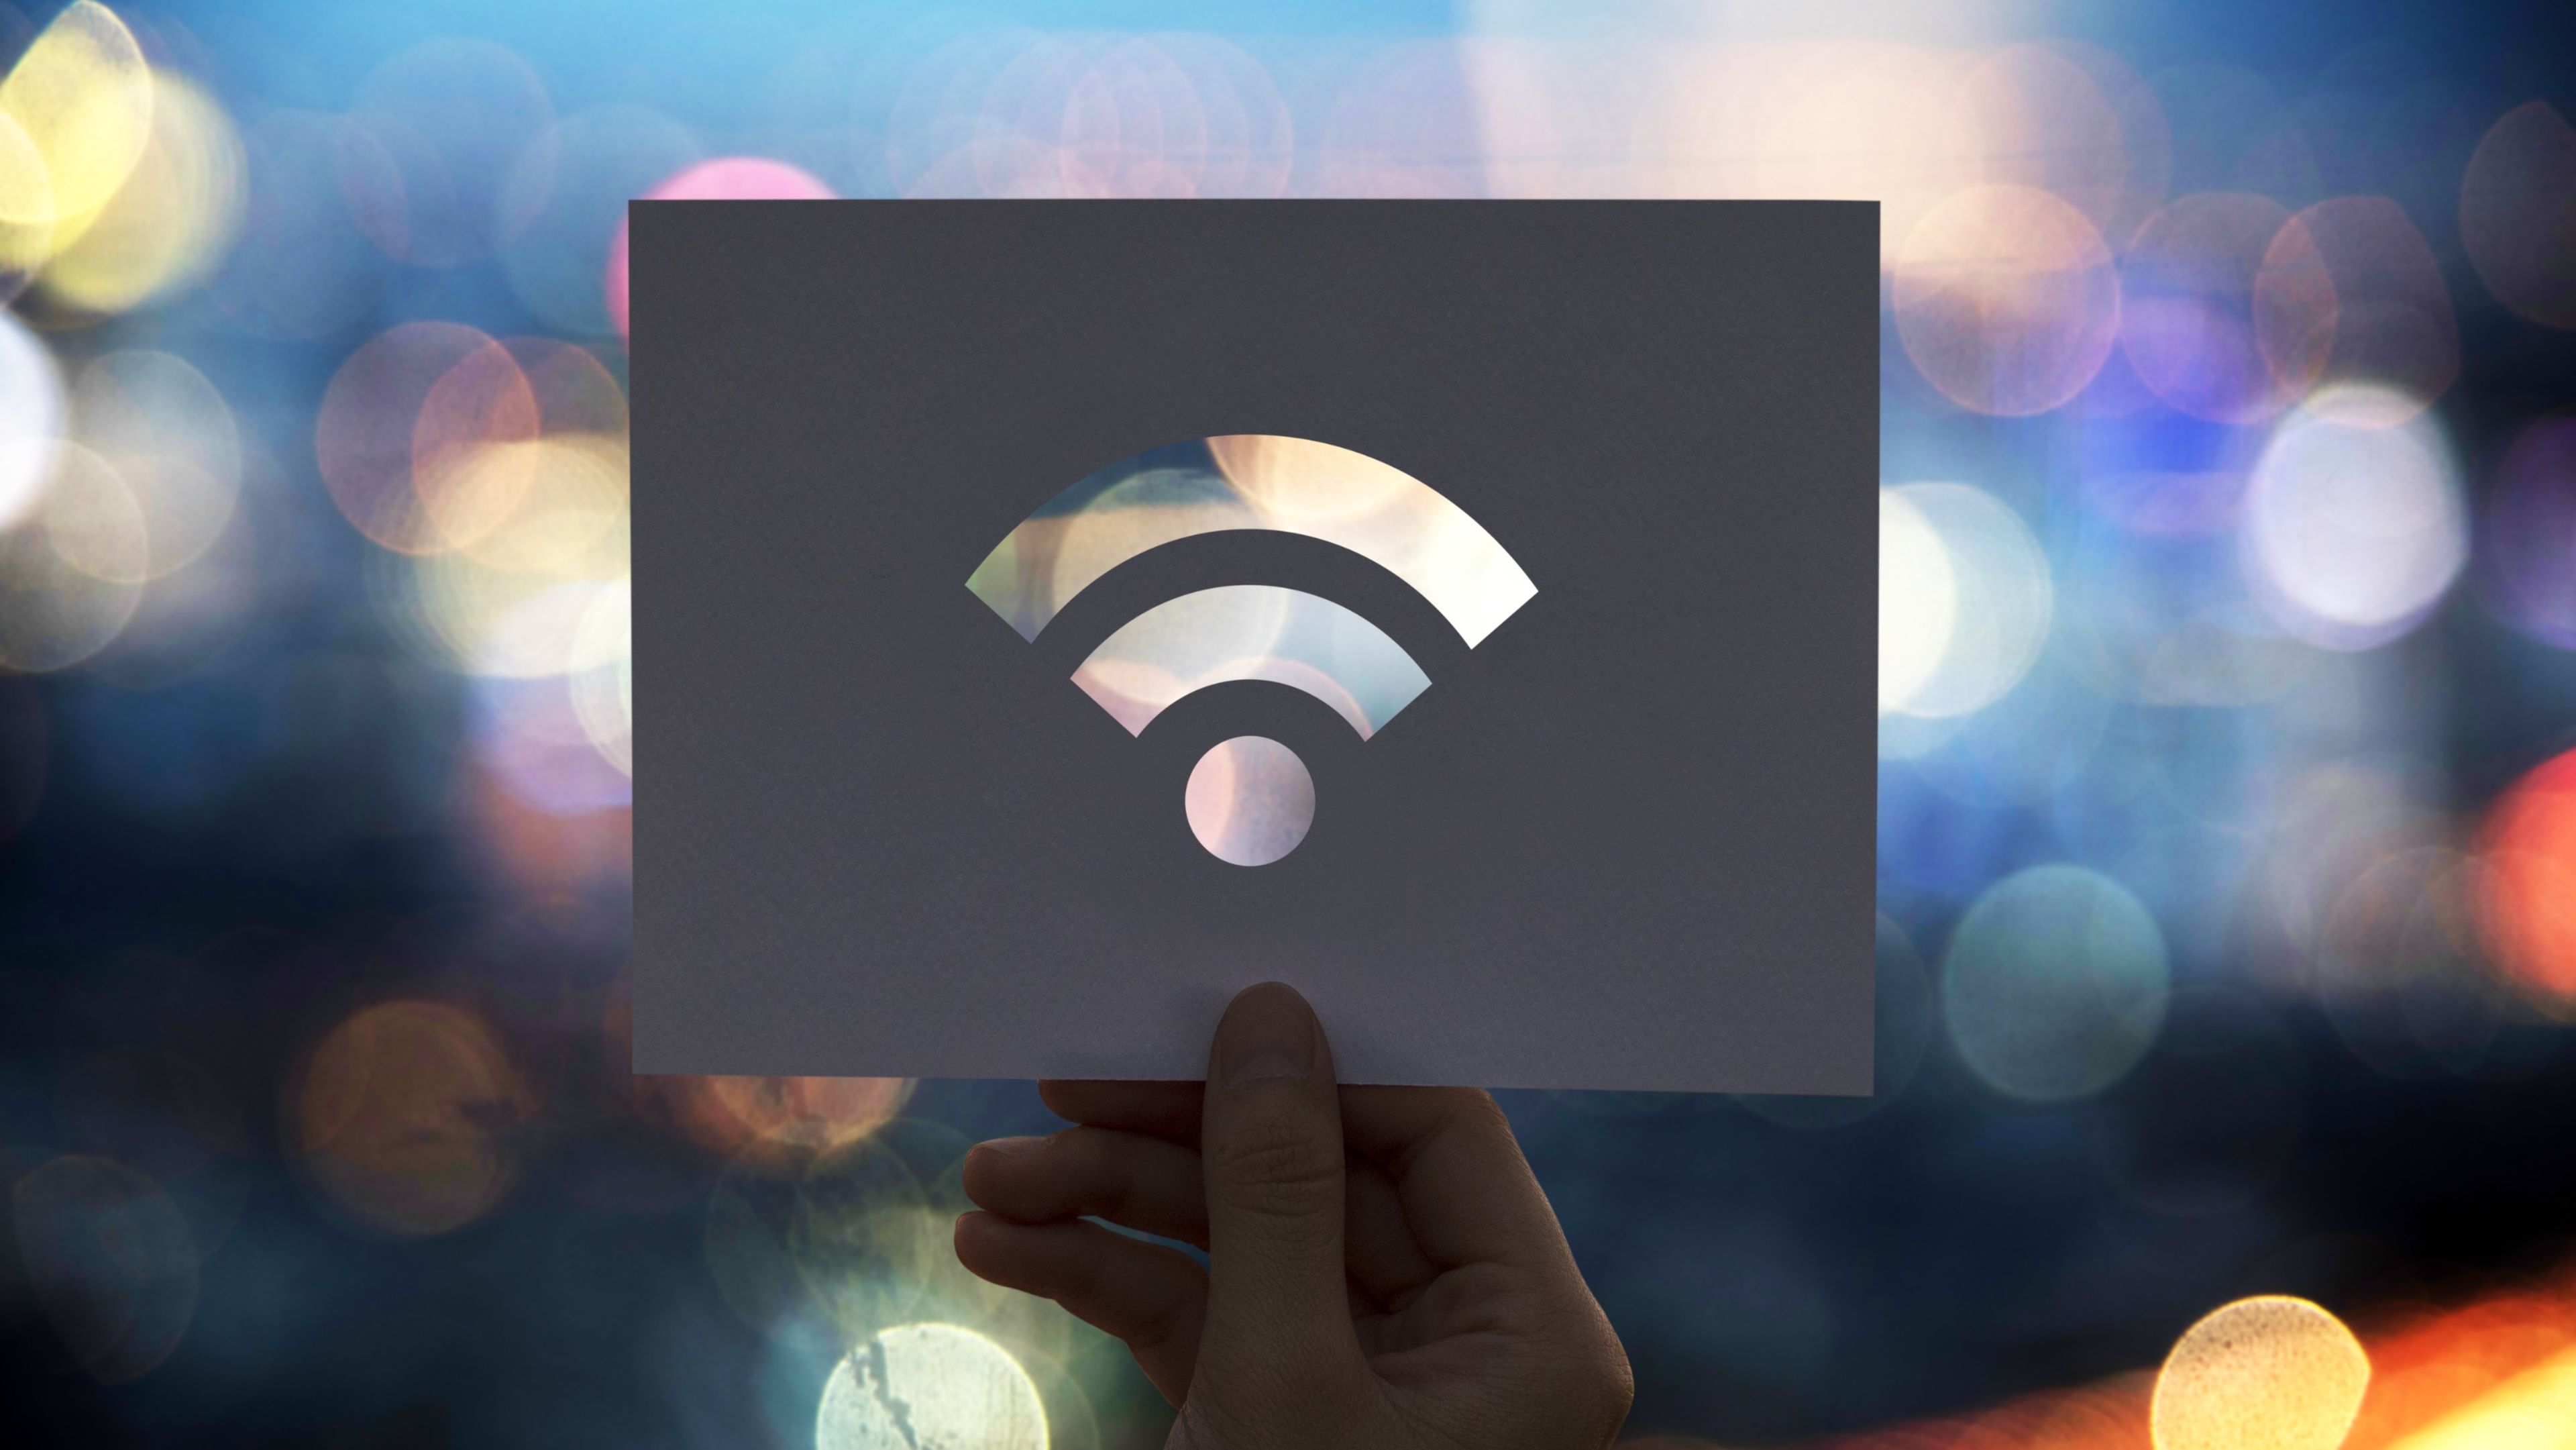 WiFi symbol with a defocused background